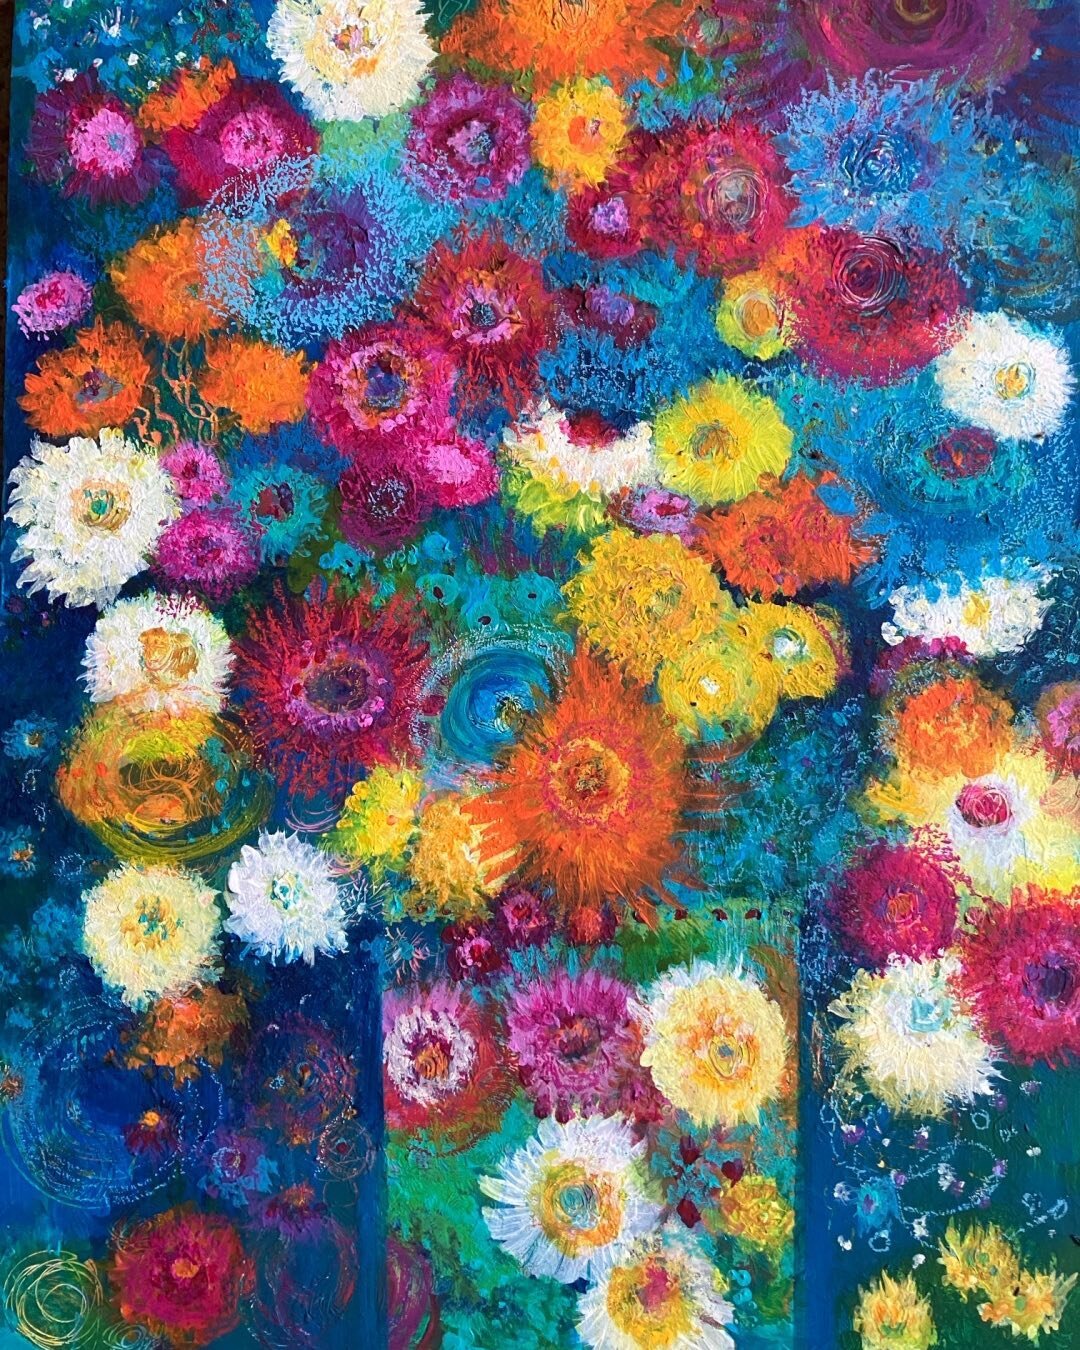 Building works finally completed and the studio is back in action. Created this new piece 12x16 inch cradled birch wood &ldquo; And then it was Spring&rdquo;. I hope you like it! #acrylicflowers#colourfulacrylics&rdquo;joyfulflowers#abstractflowers